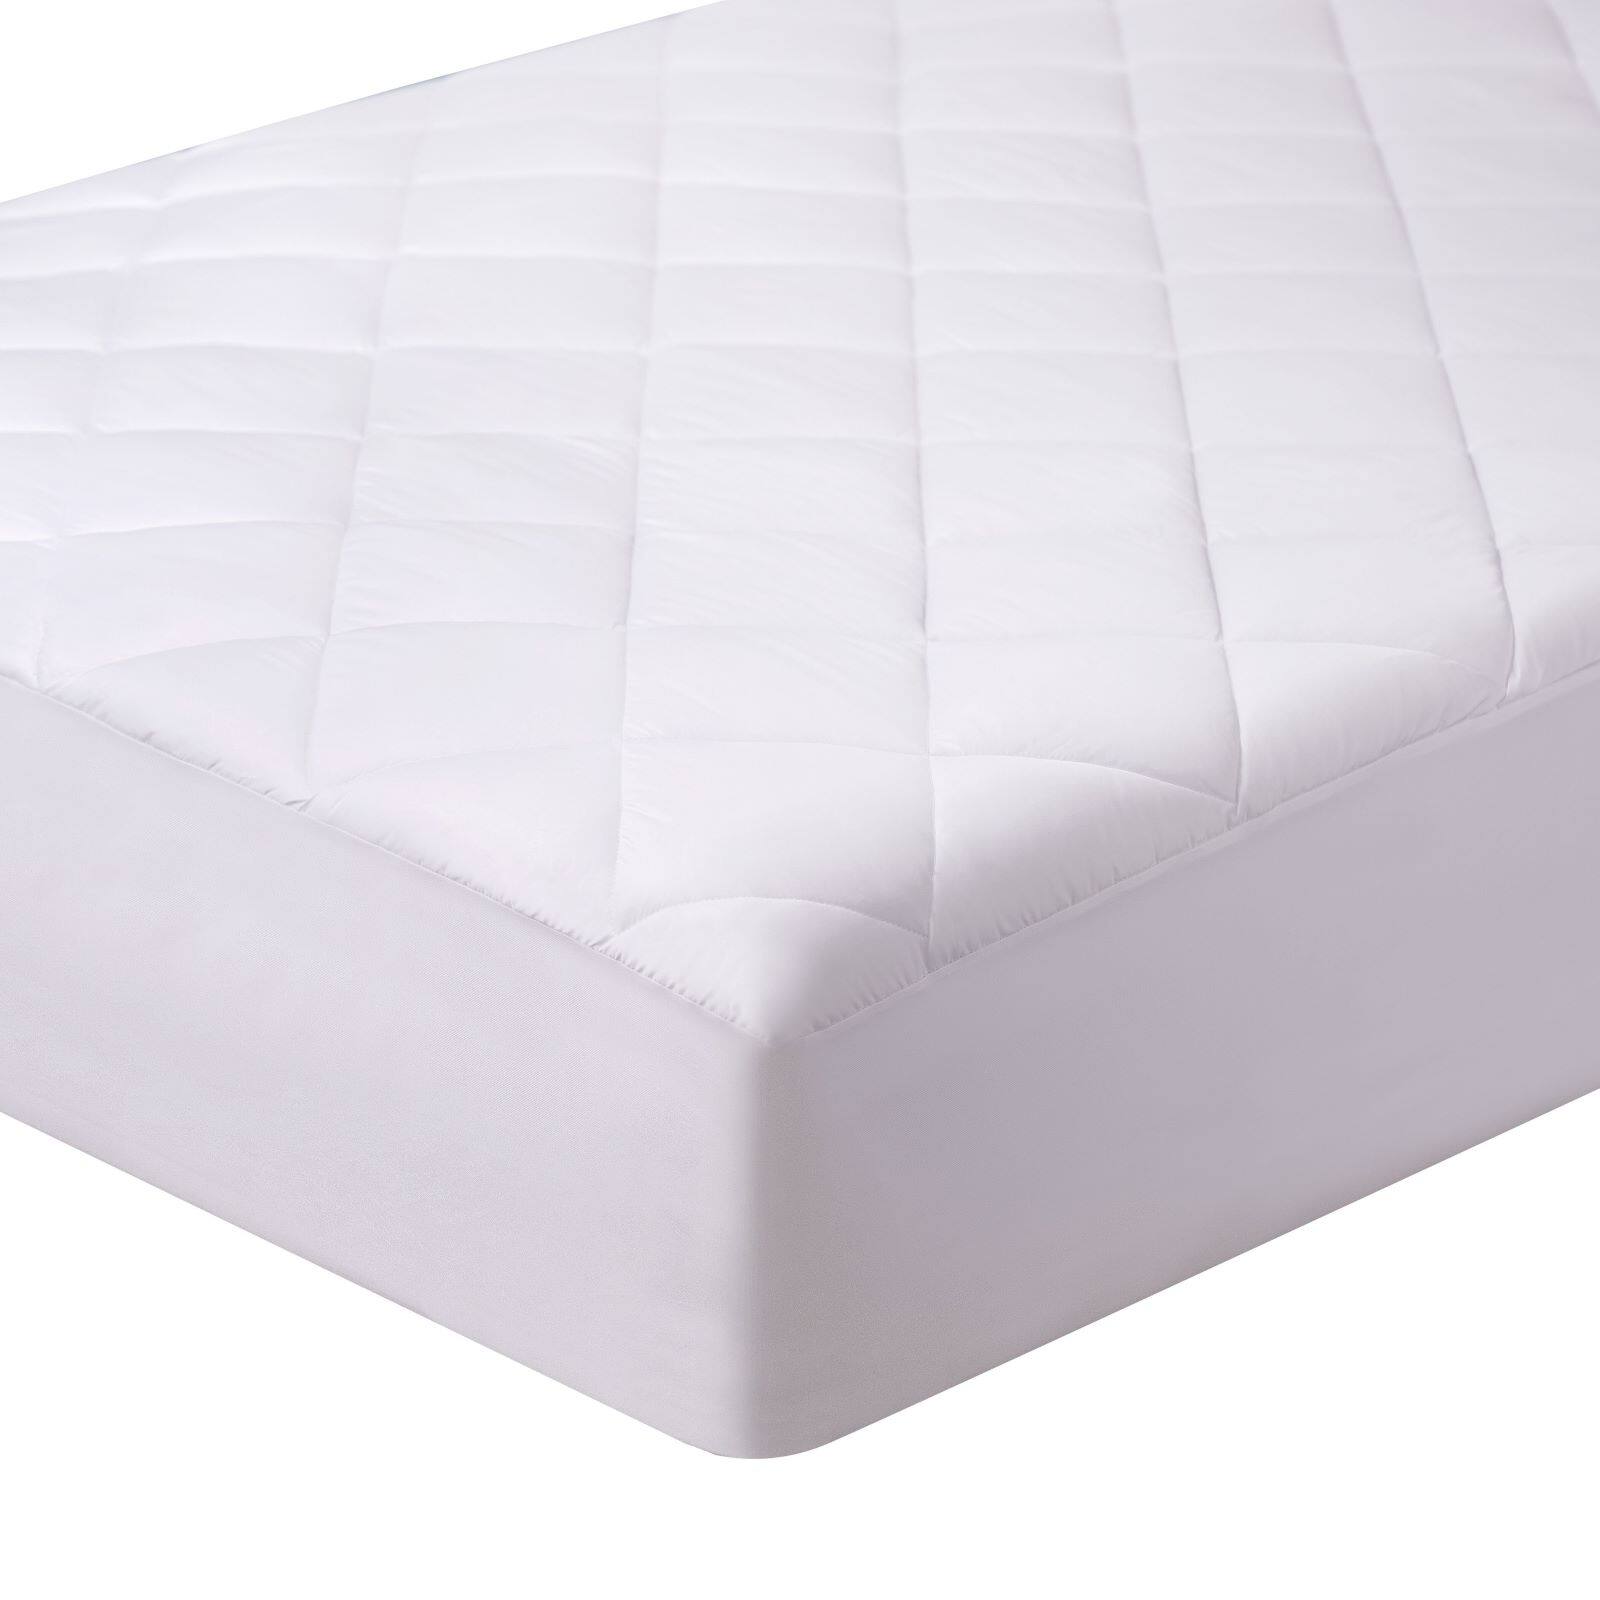  Utopia Bedding Quilted Fitted Mattress Pad (Twin) - Elastic  Fitted Mattress Protector - Mattress Cover Stretches up to 16 Inches Deep -  Machine Washable Mattress Topper : Home & Kitchen